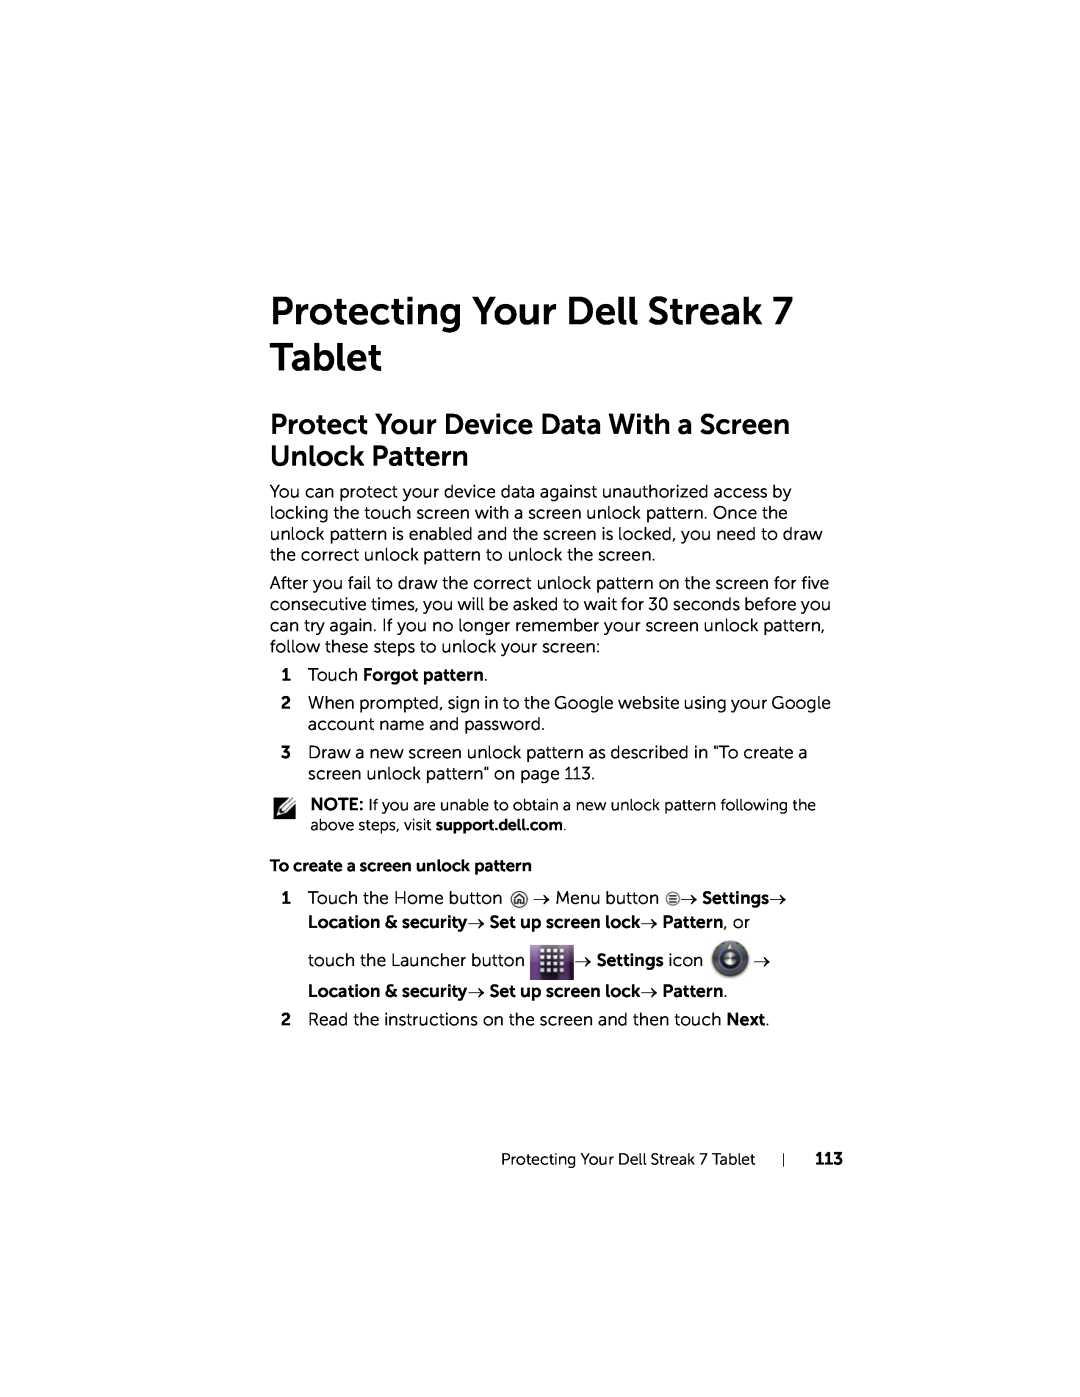 Dell user manual Protecting Your Dell Streak 7 Tablet, Protect Your Device Data With a Screen Unlock Pattern 